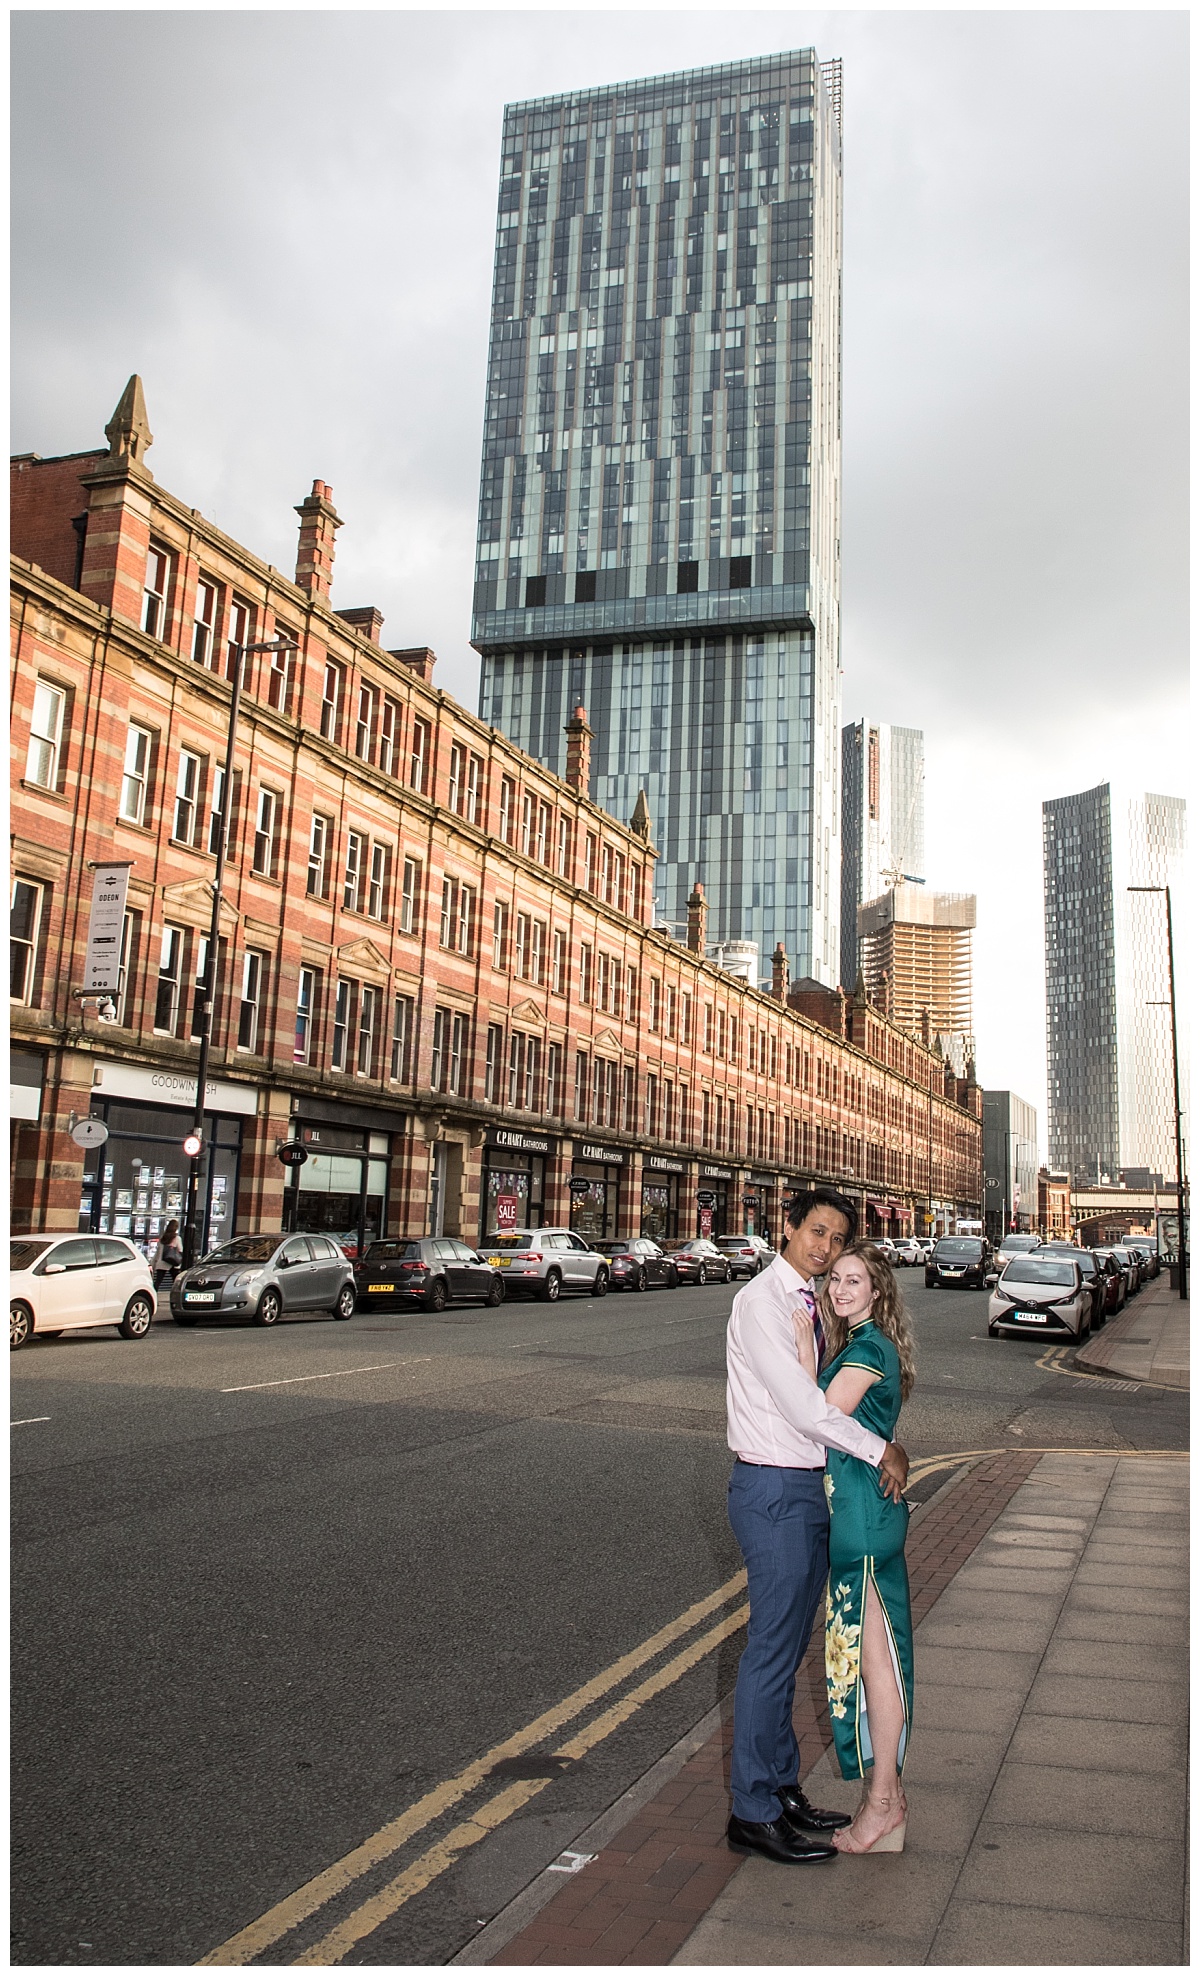 Wedding Photography Manchester - Stephanie and James's Pre wedding Shoot in Castlefield 1